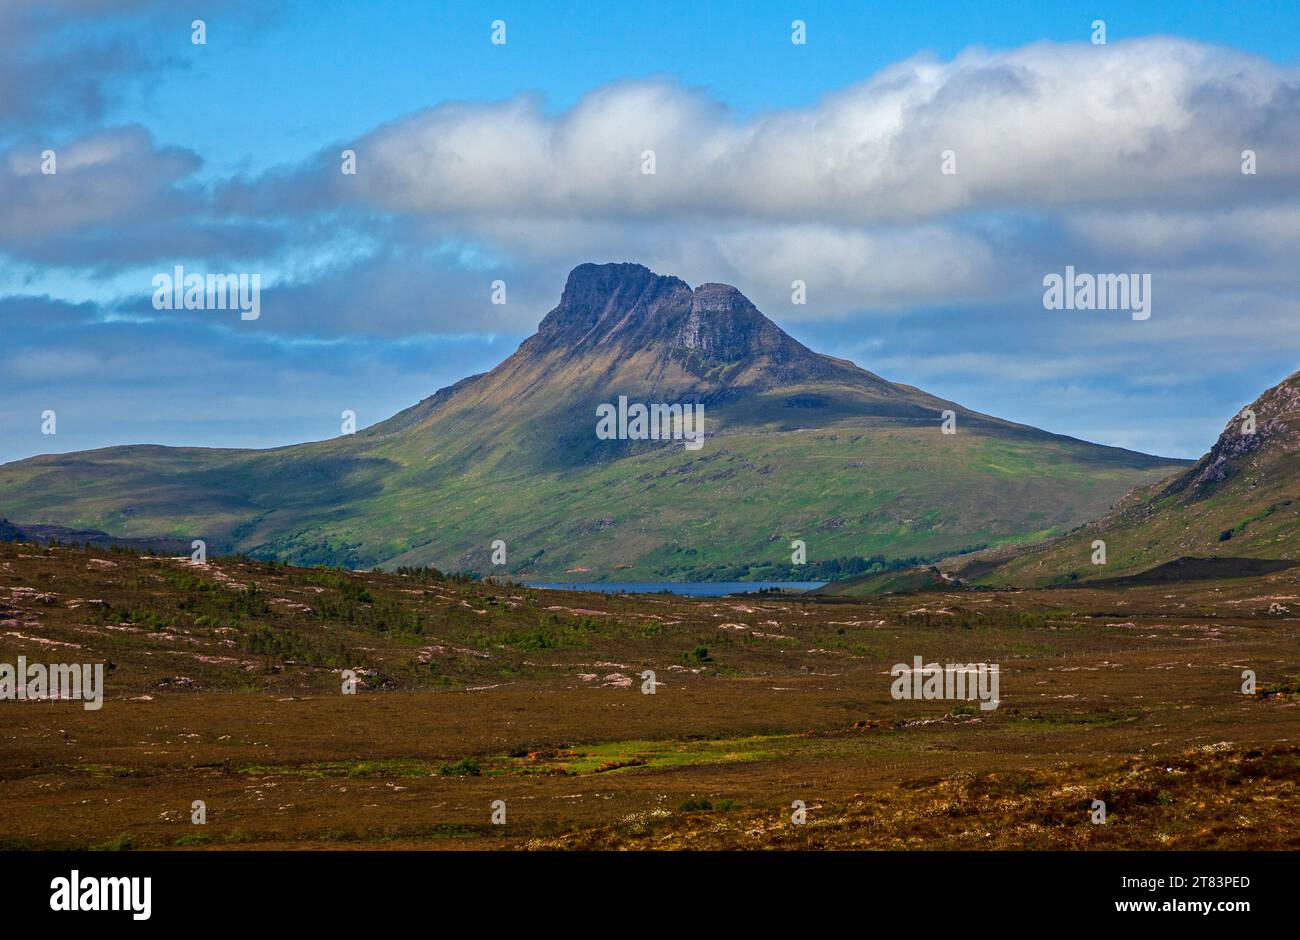 STAC Pollaidh, Wester Ross, Scottish Highlands, Regno Unito. Foto Stock